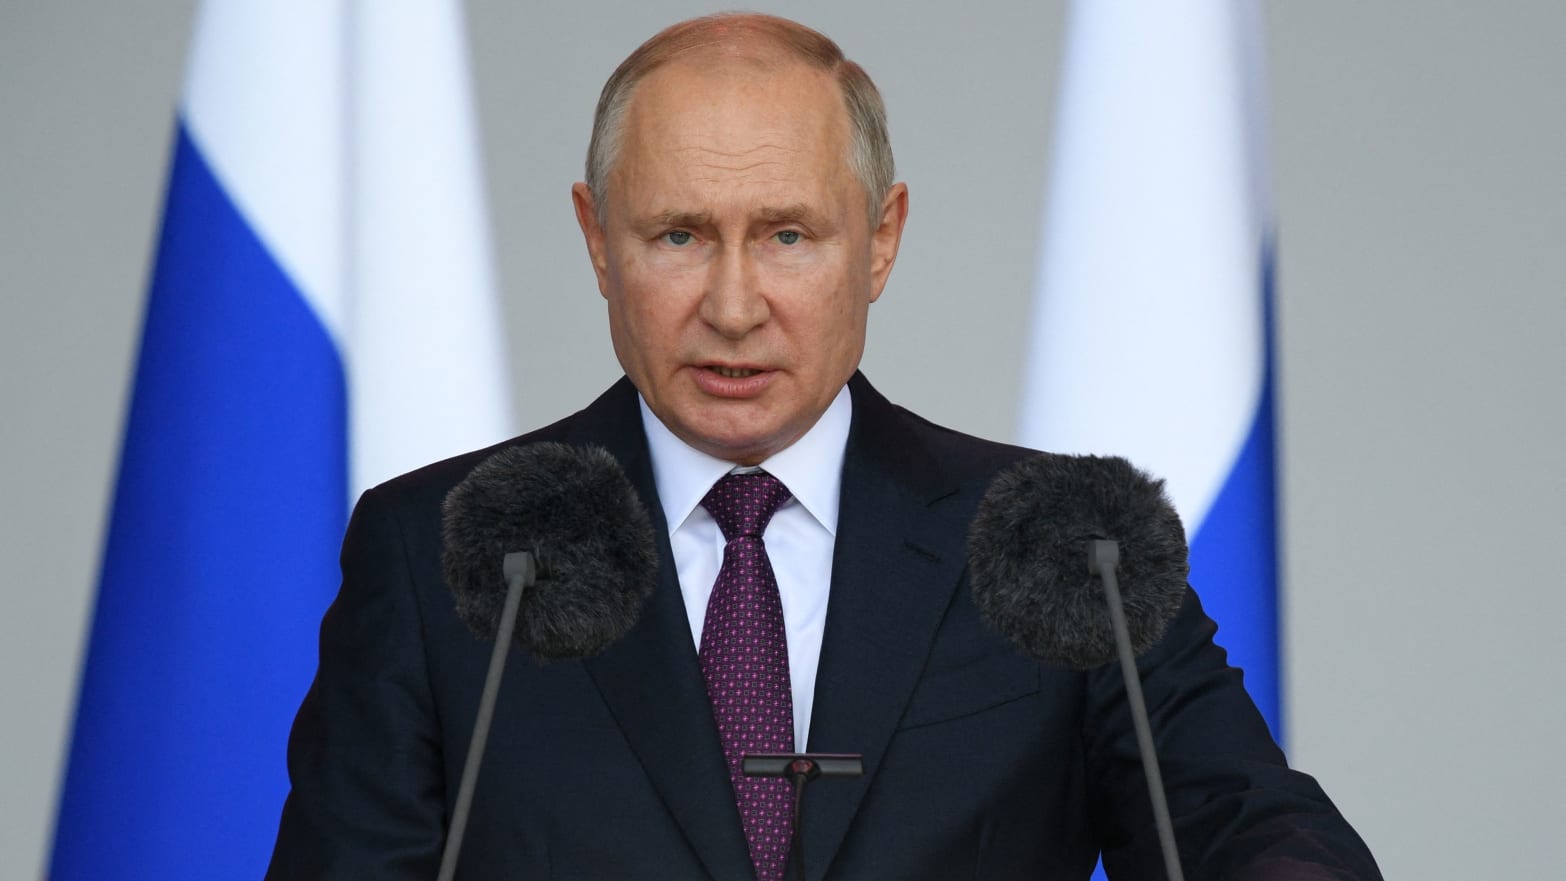 Putin: Western countries want to extend NATO-like system to the Asia-Pacific region